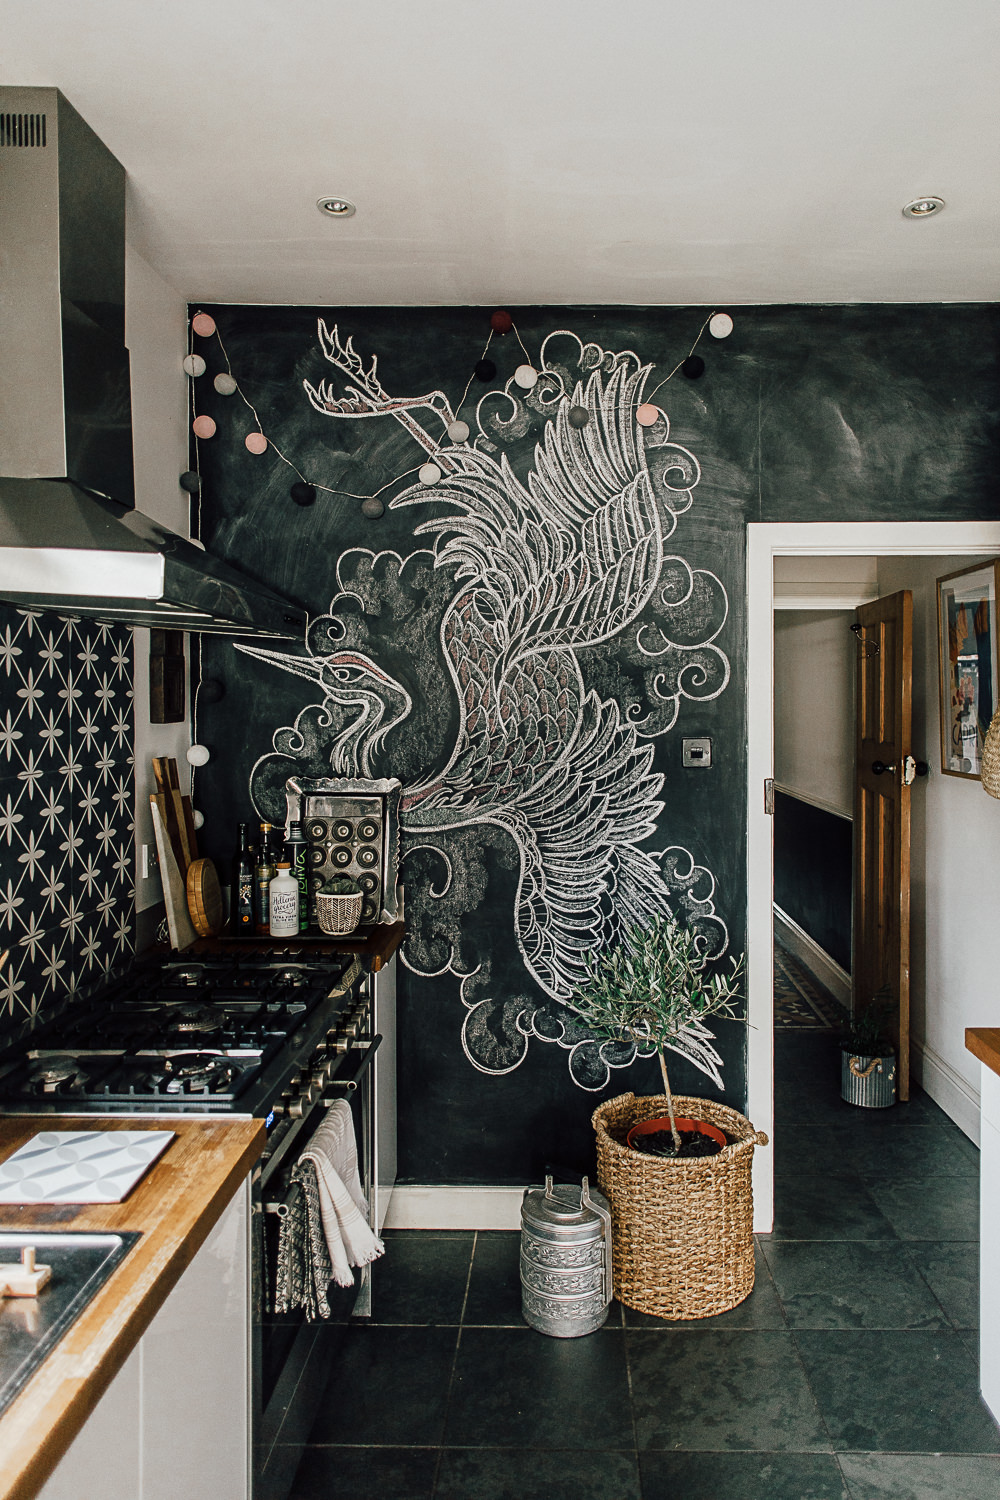 Blackboard paint on kitchen wall with hand drawn illustrations